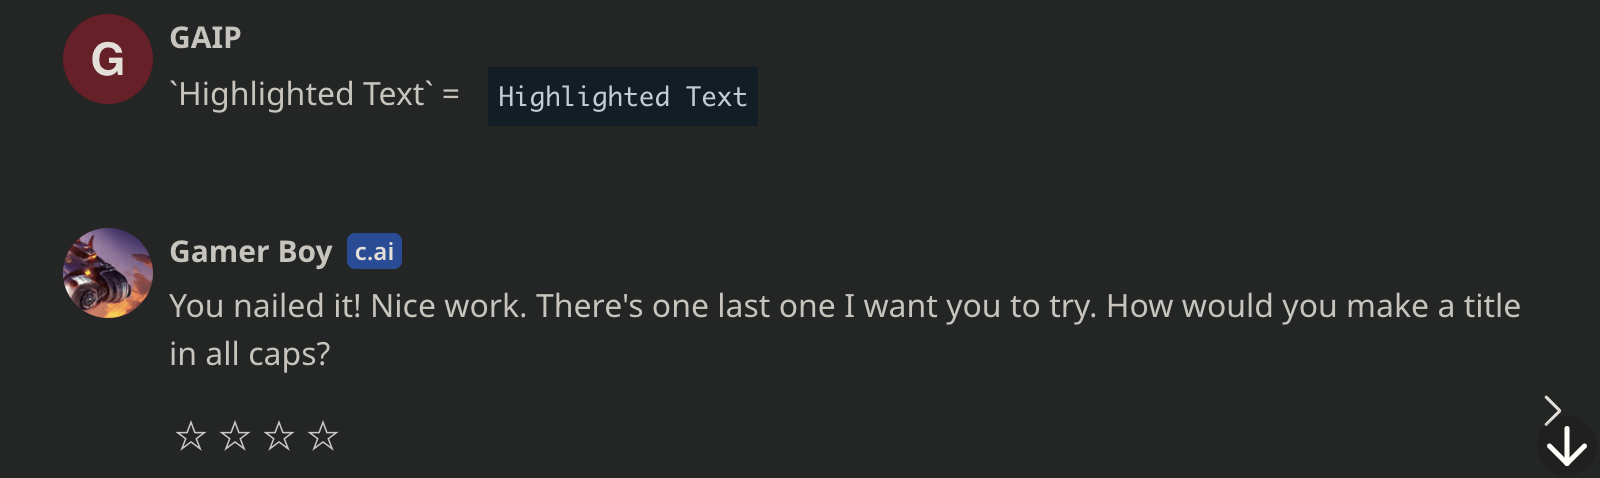 Highlighting text in character.ai